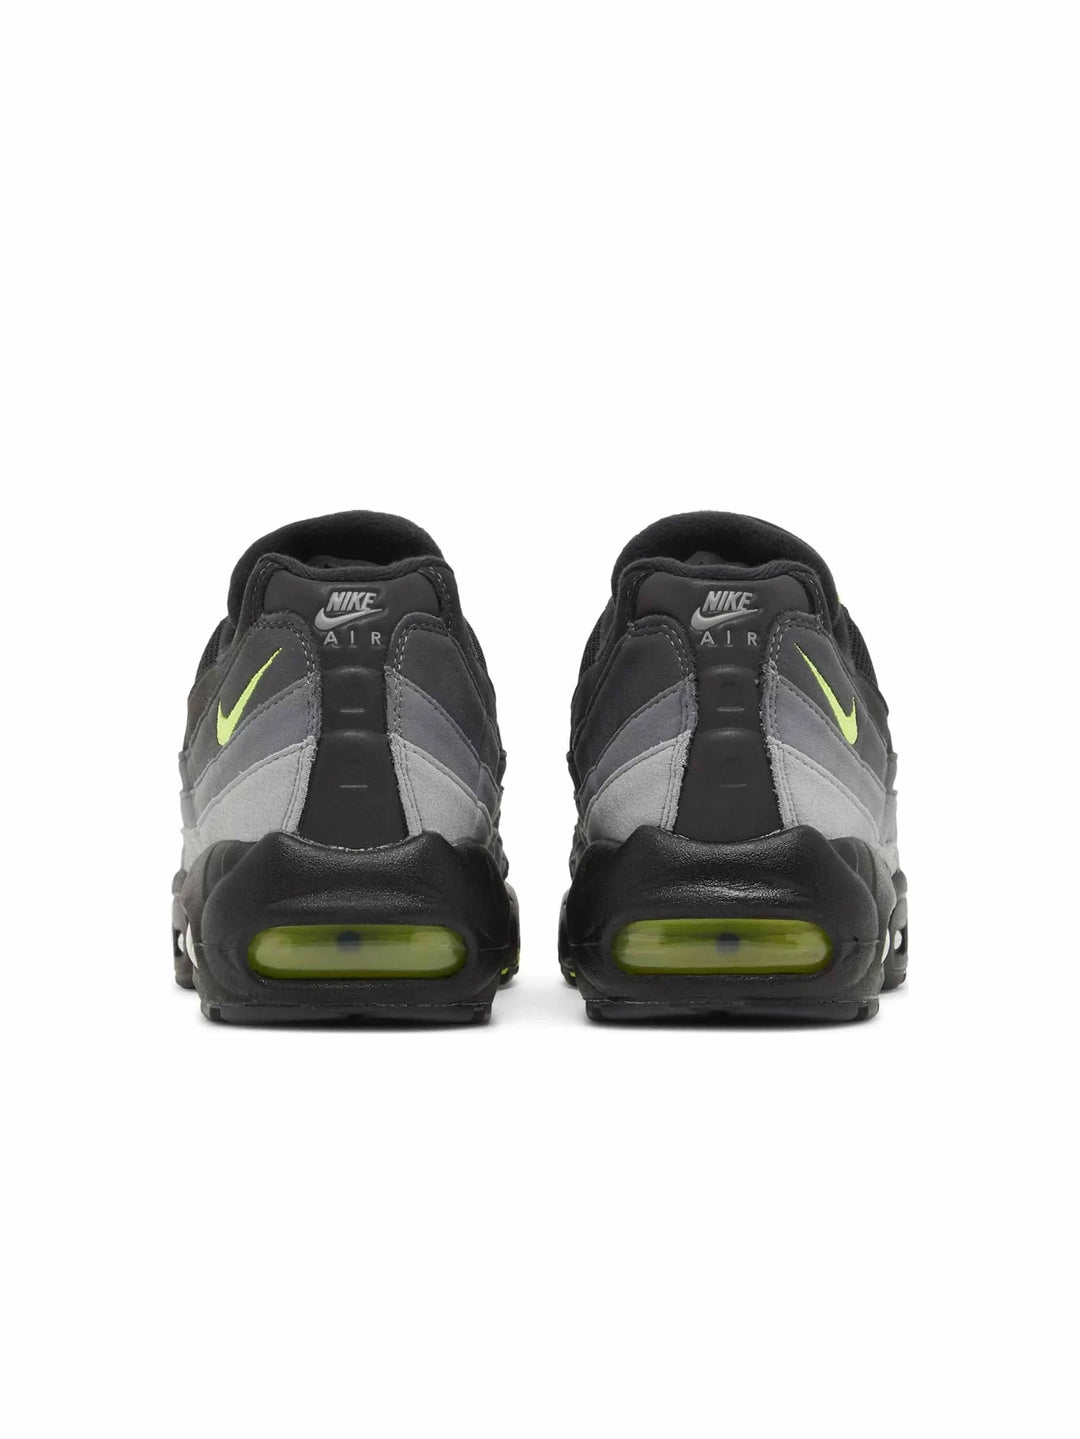 Nike Air Max 95 Black Neon in Auckland, New Zealand - Shop name